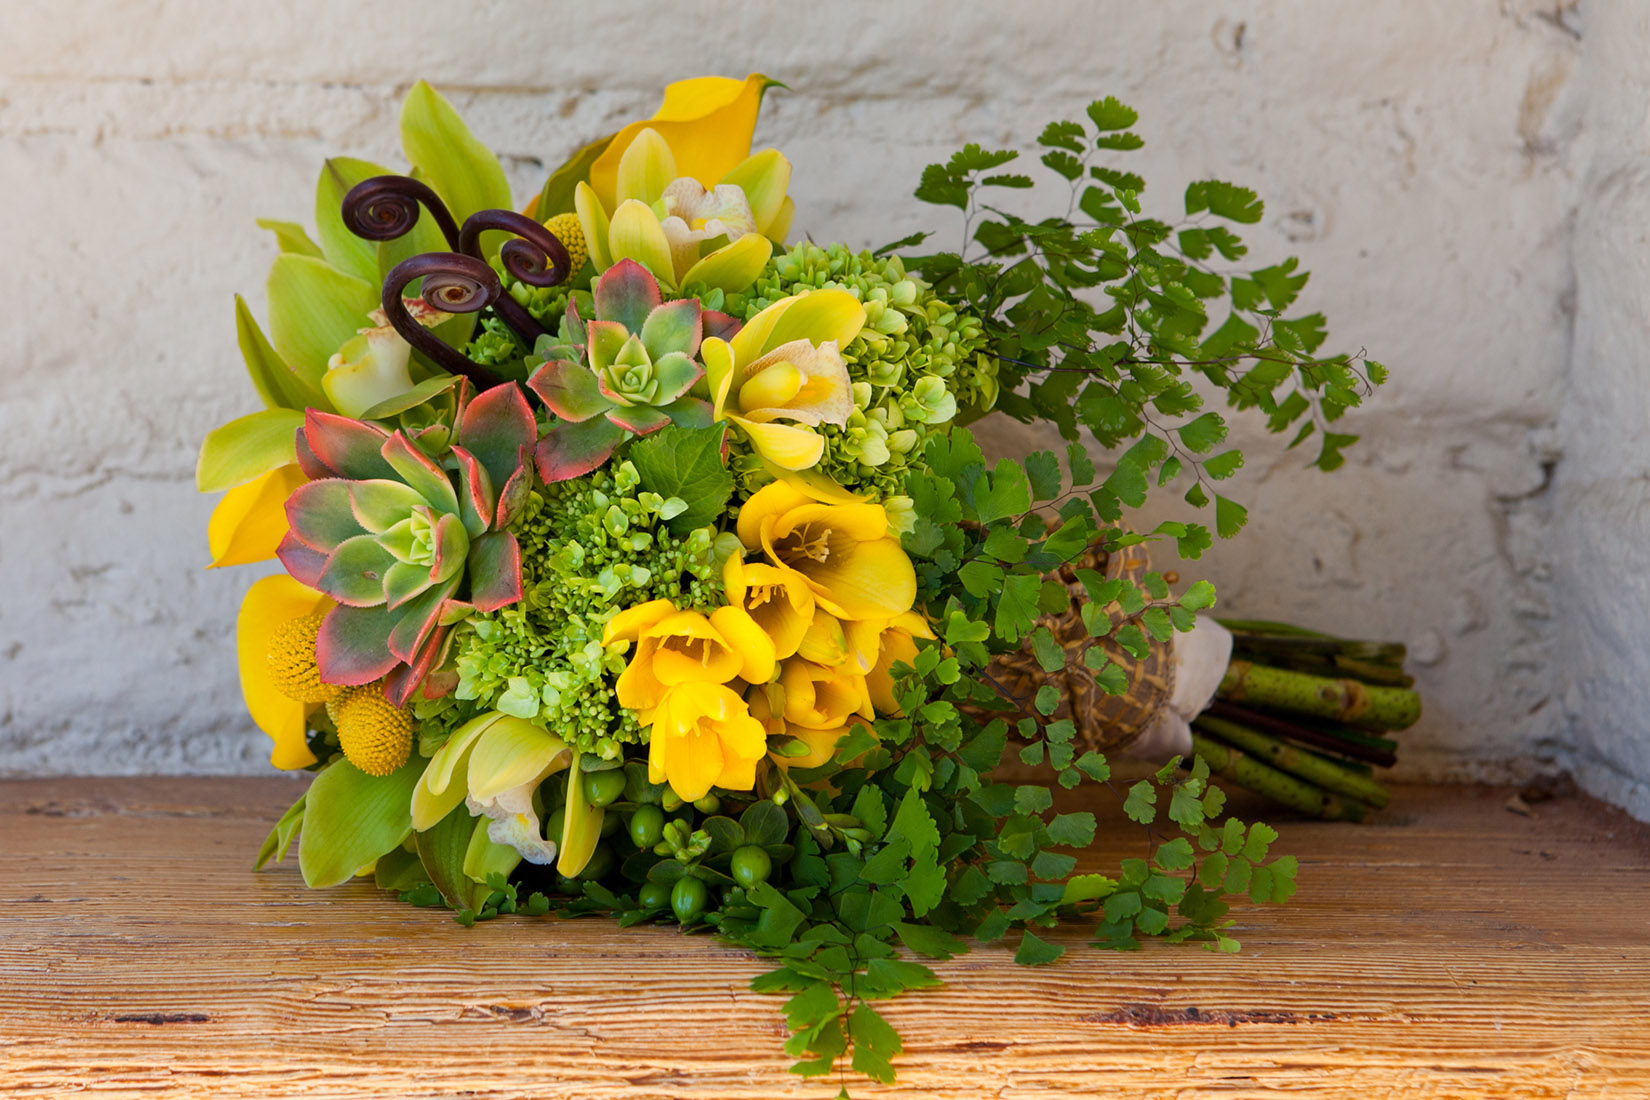 An image of a yellow flower and green succulent bouquet from the Sherman Garden Wedding